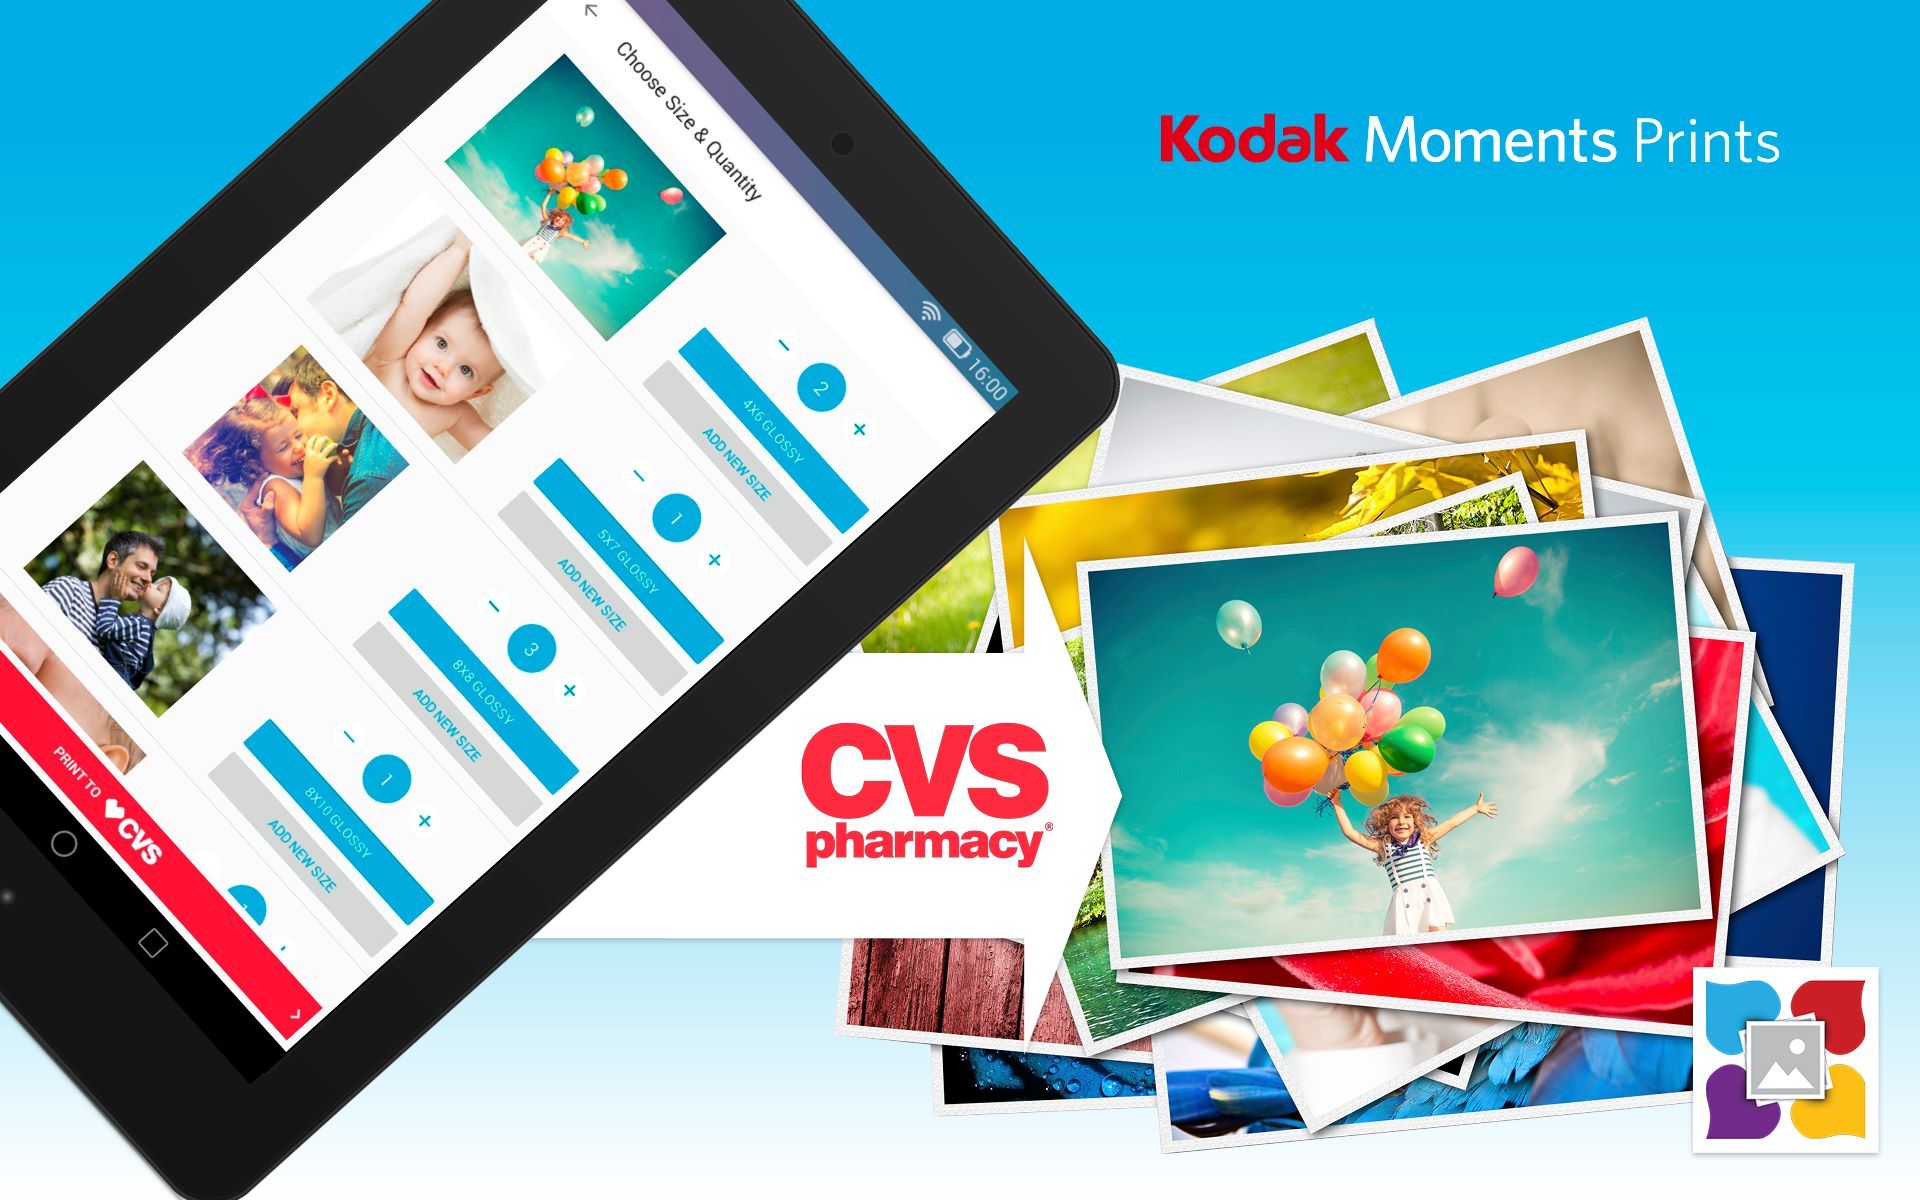 Photo Prints Now: CVS Photo Prints From Your Kindle, Fire Tablet & Phone